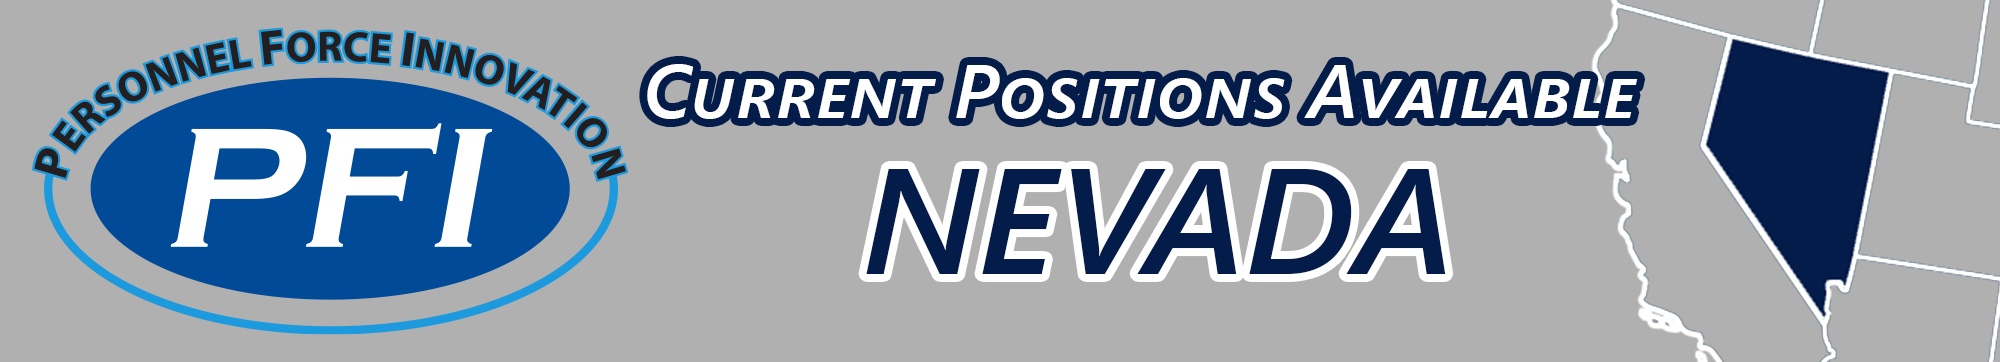 Decorative banner that says Personnel Force Innovation (PFI) current positions available in Nevada